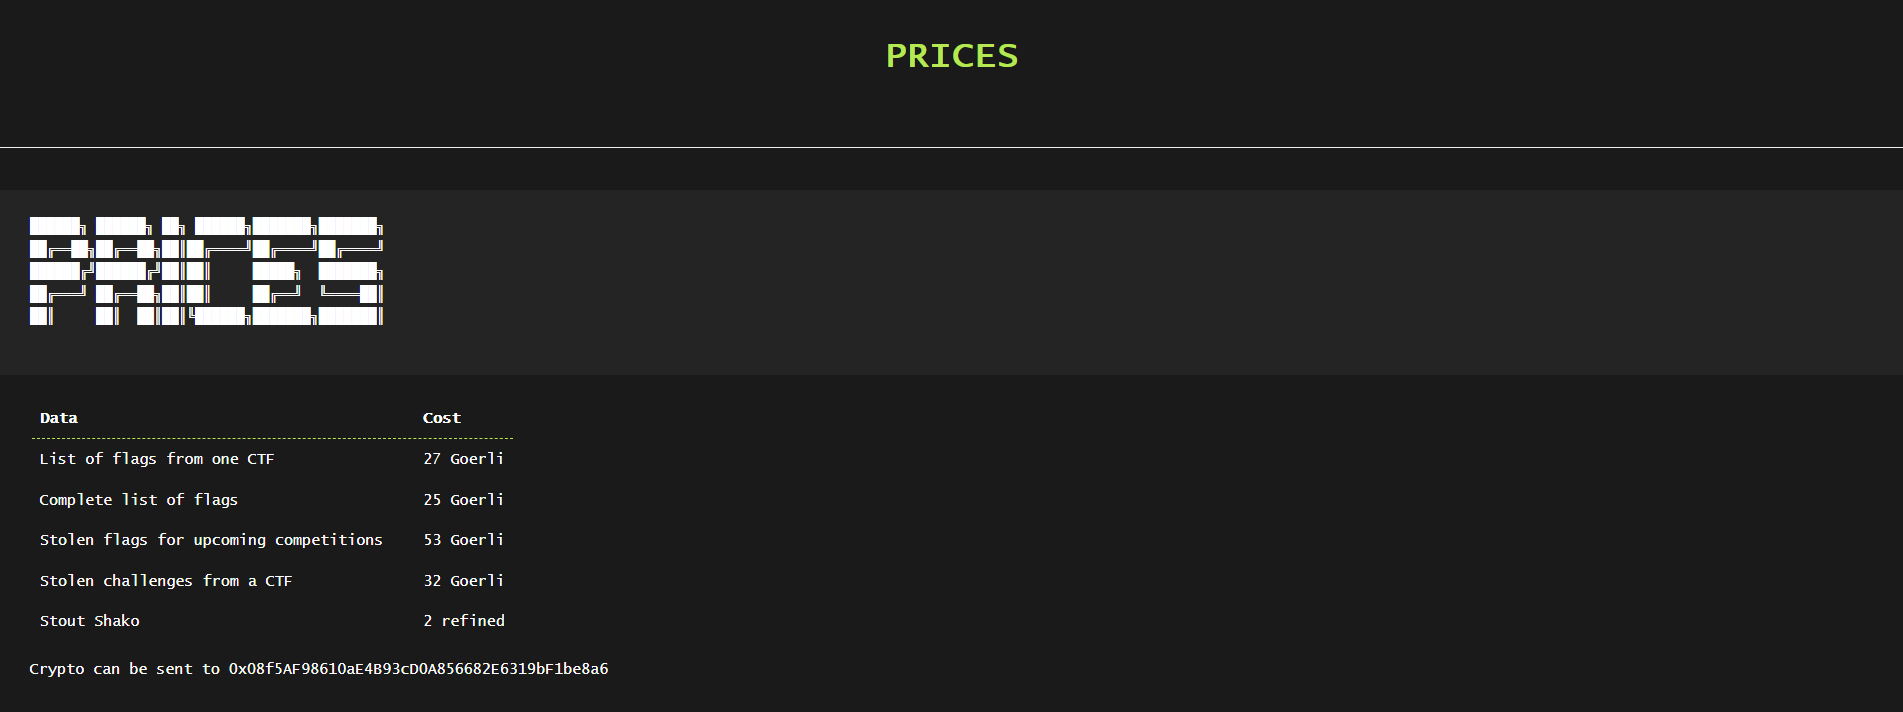 Screenshot of /prices.html from WannaFlag website